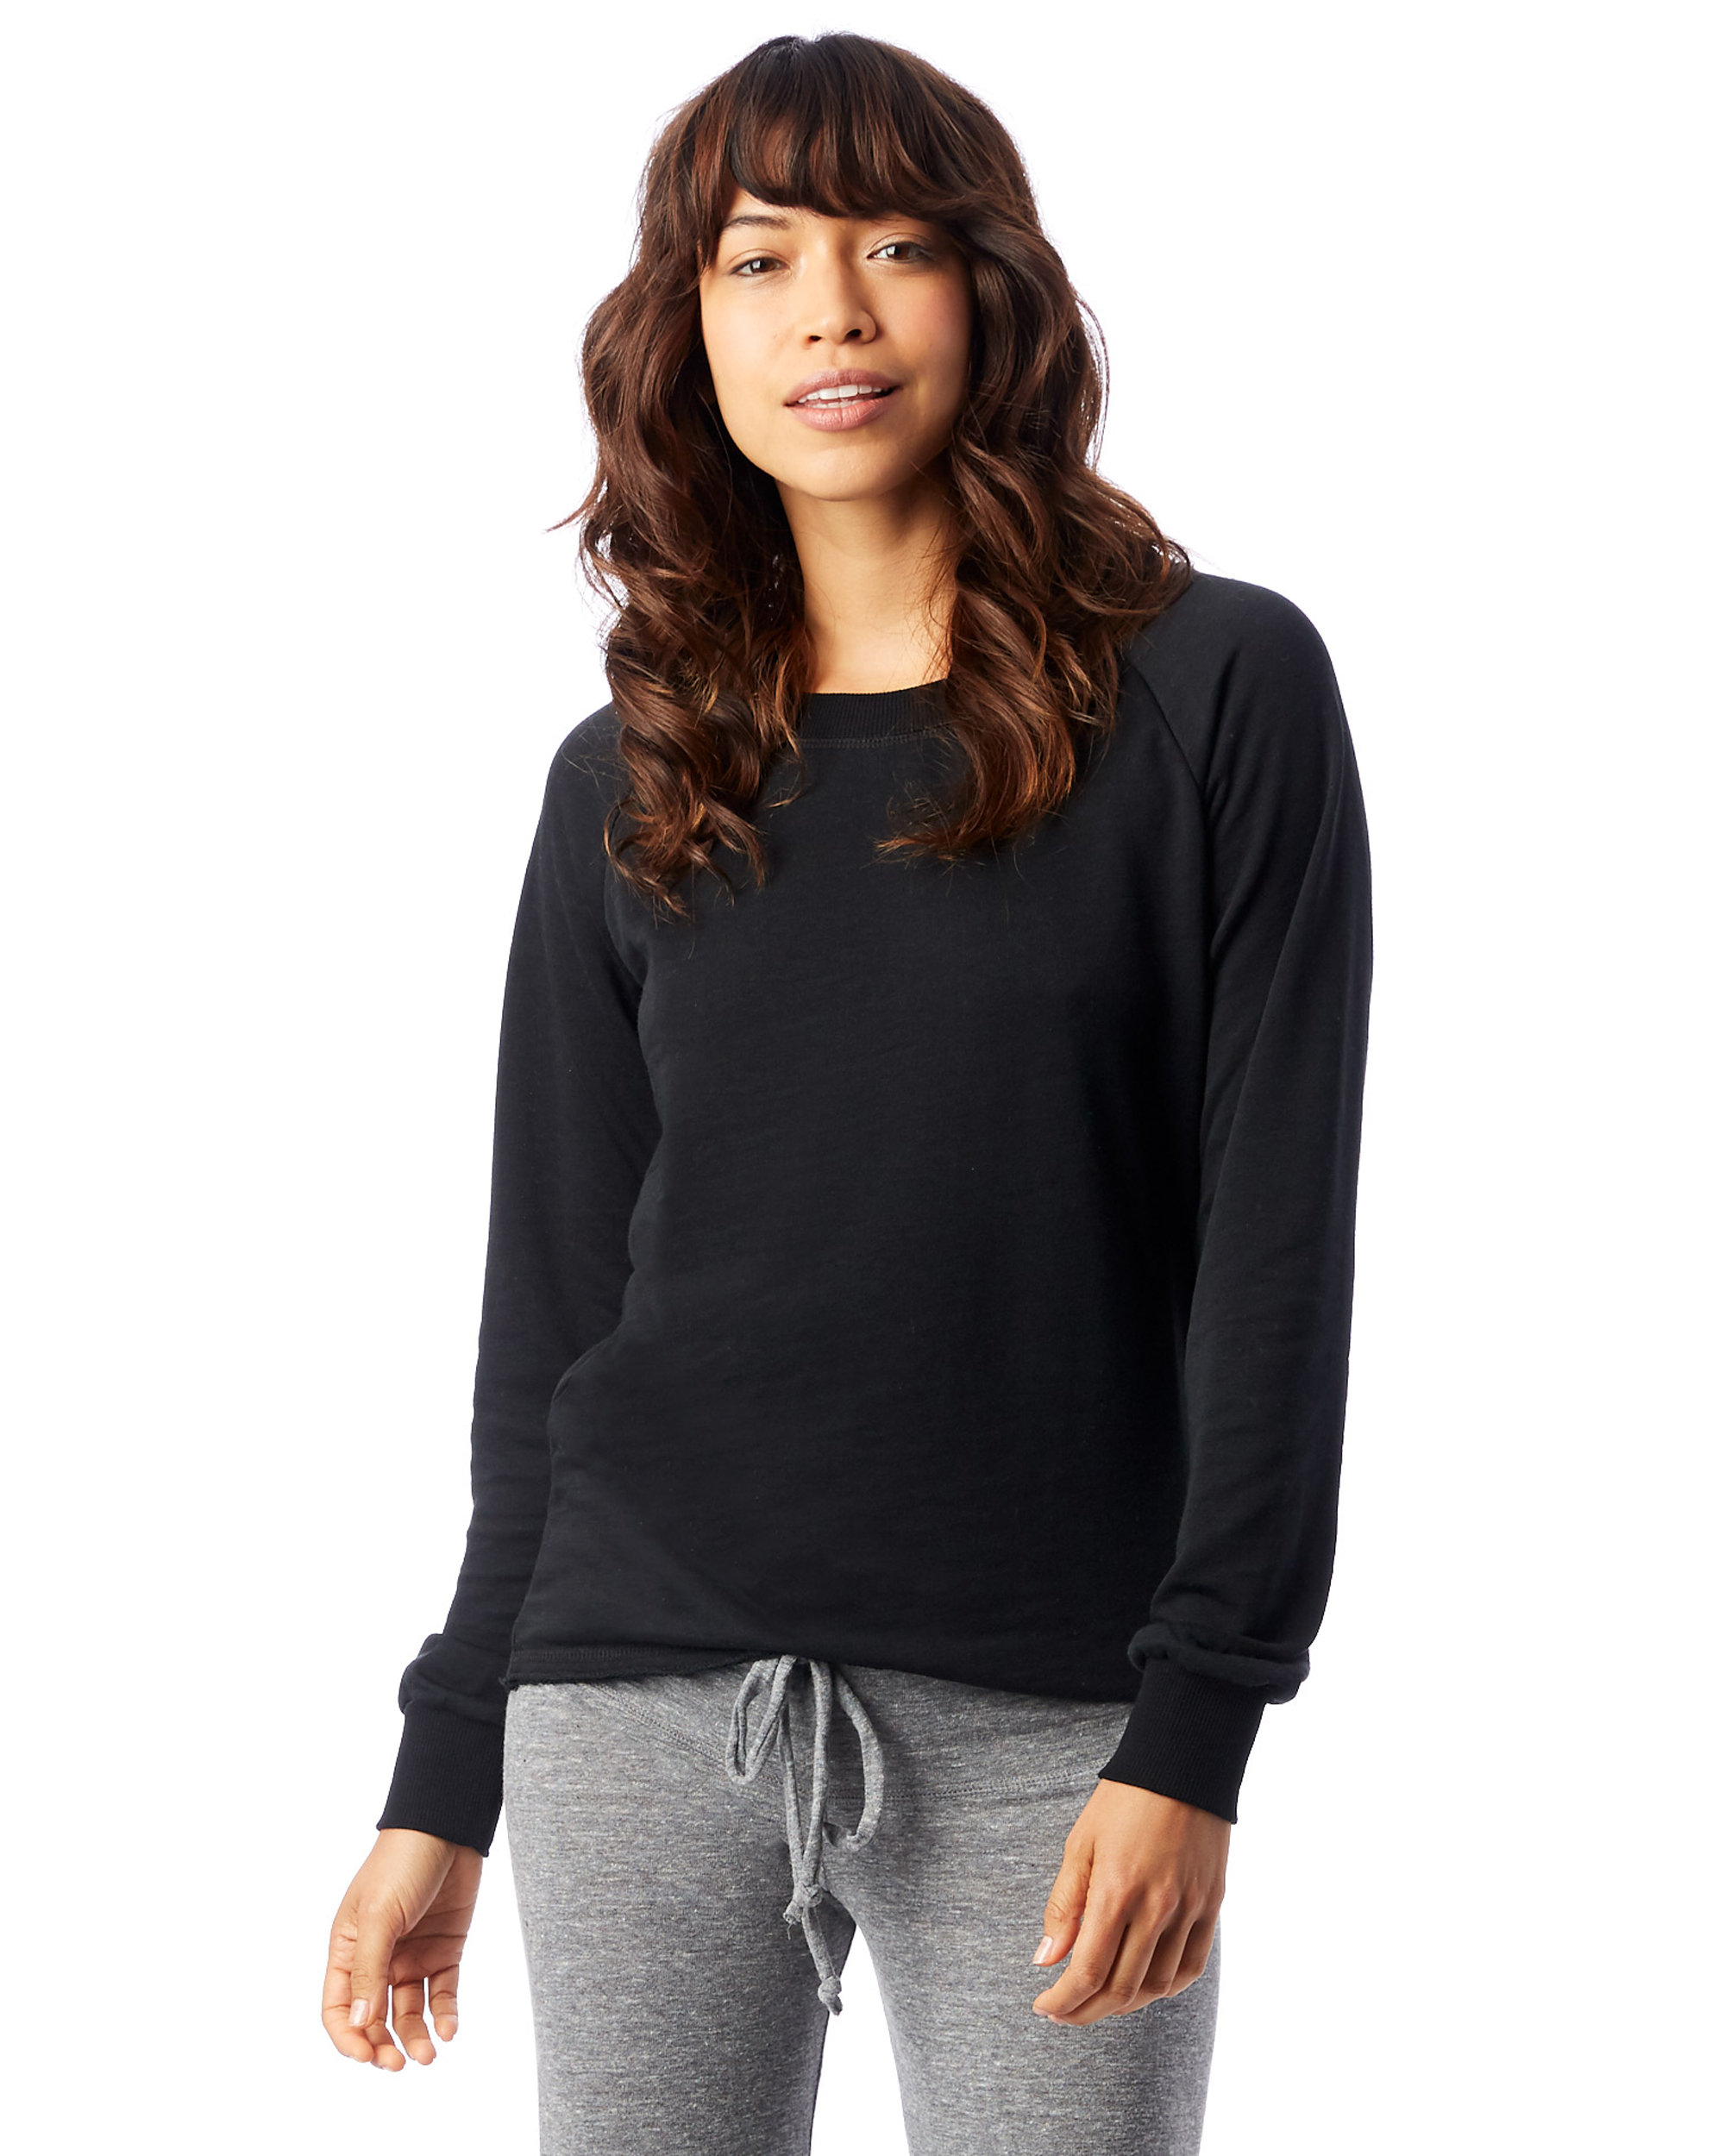 AV095 - Women's Lazy Day Burnout French Terry Pullover Sweatshirt - One ...